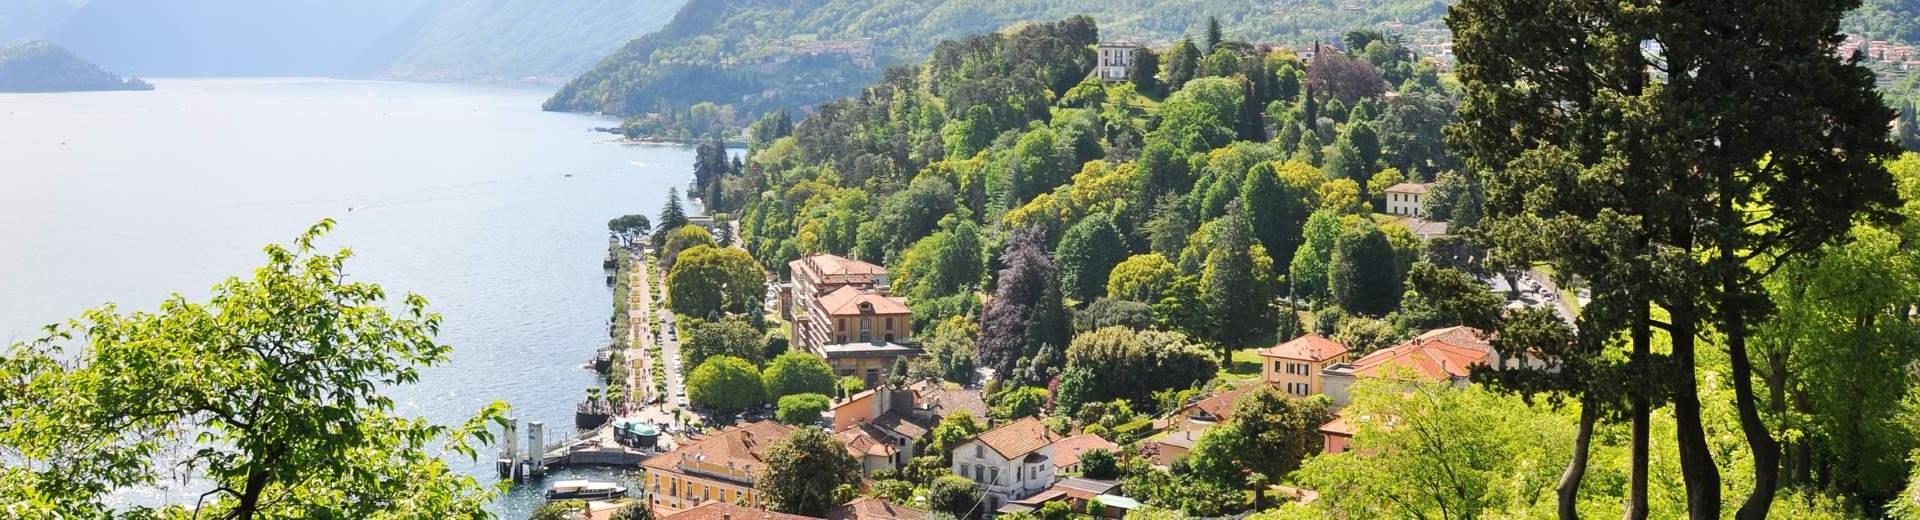 Find the perfect vacation home in Lombardy - Casamundo